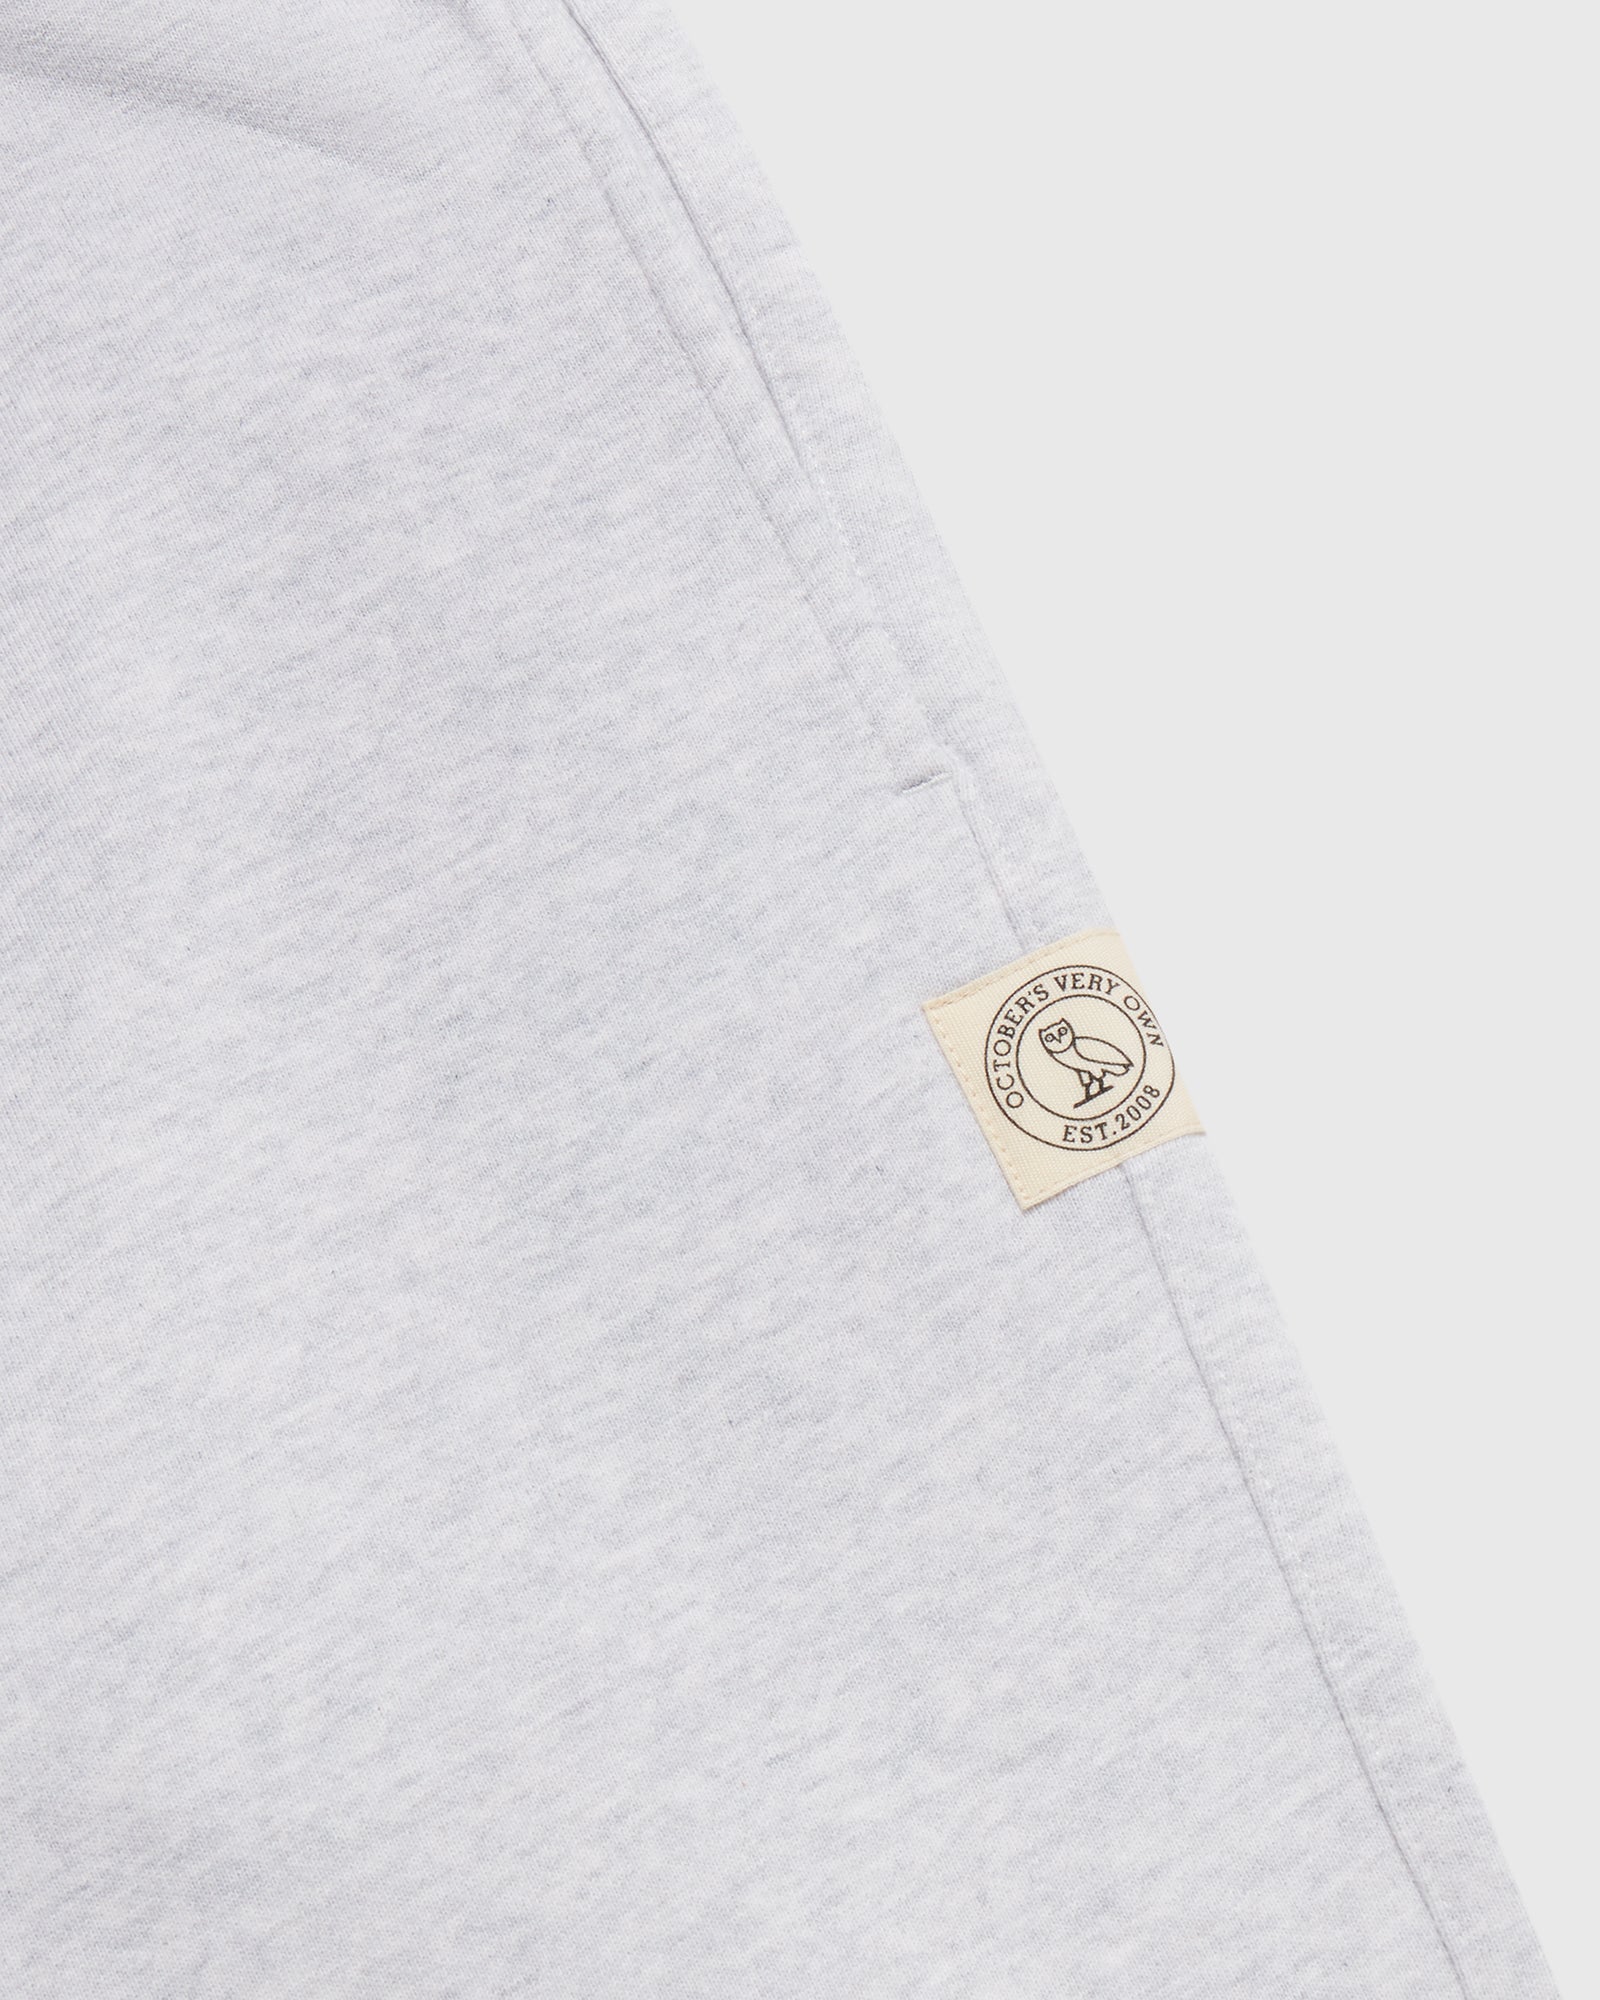 French Terry Relaxed Fit Sweatpant - Pearl Grey